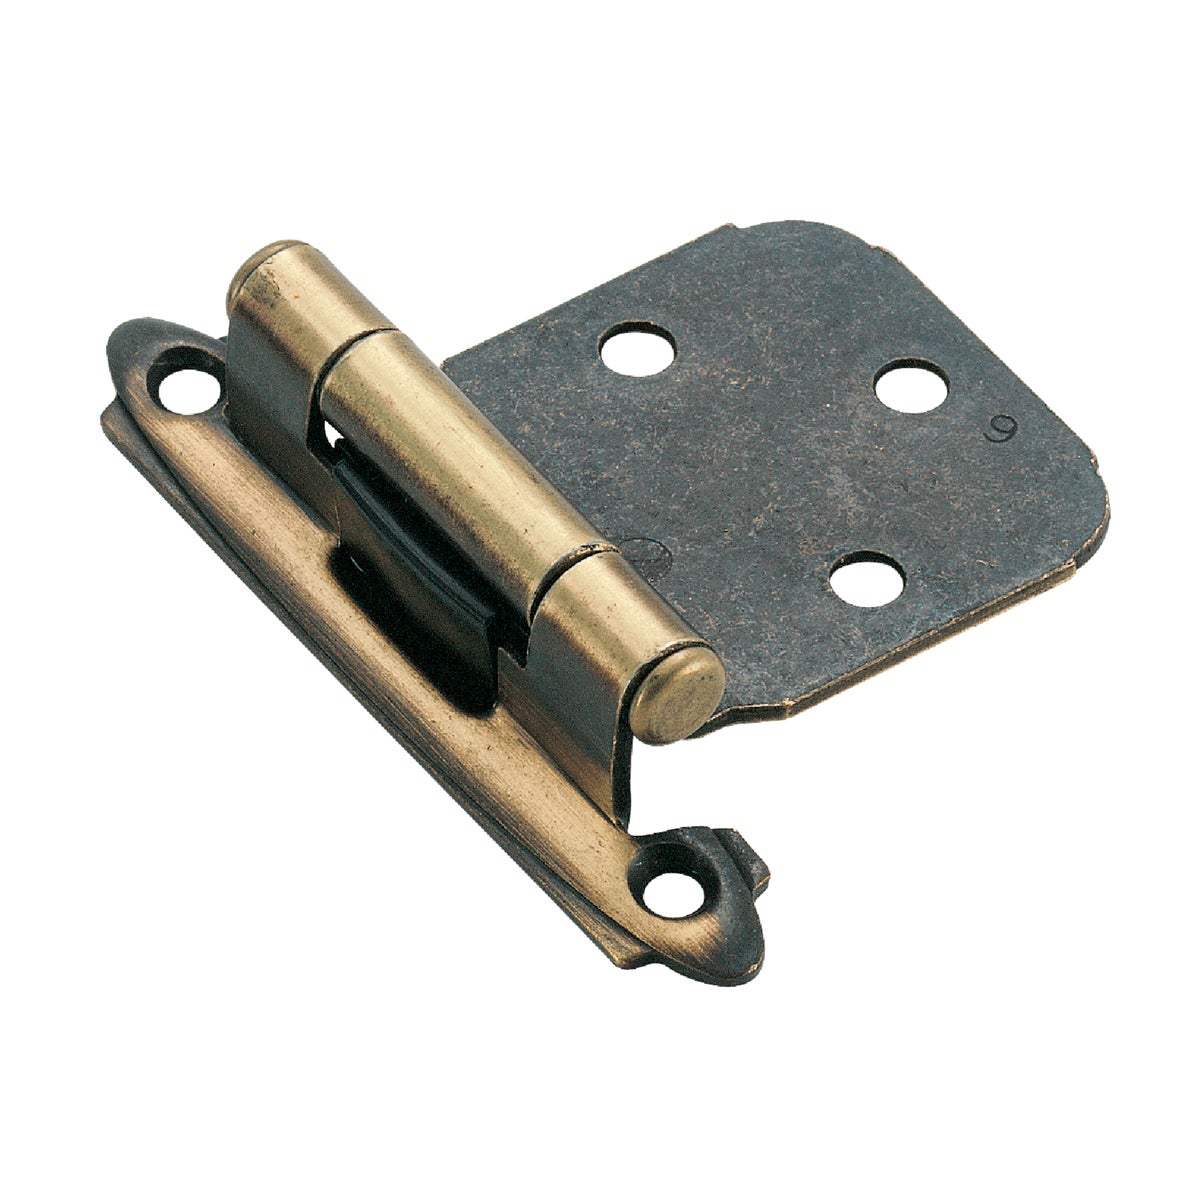 Amerock Antique Brass Self-Closing Variable Overlay Hinge (2-Pack)